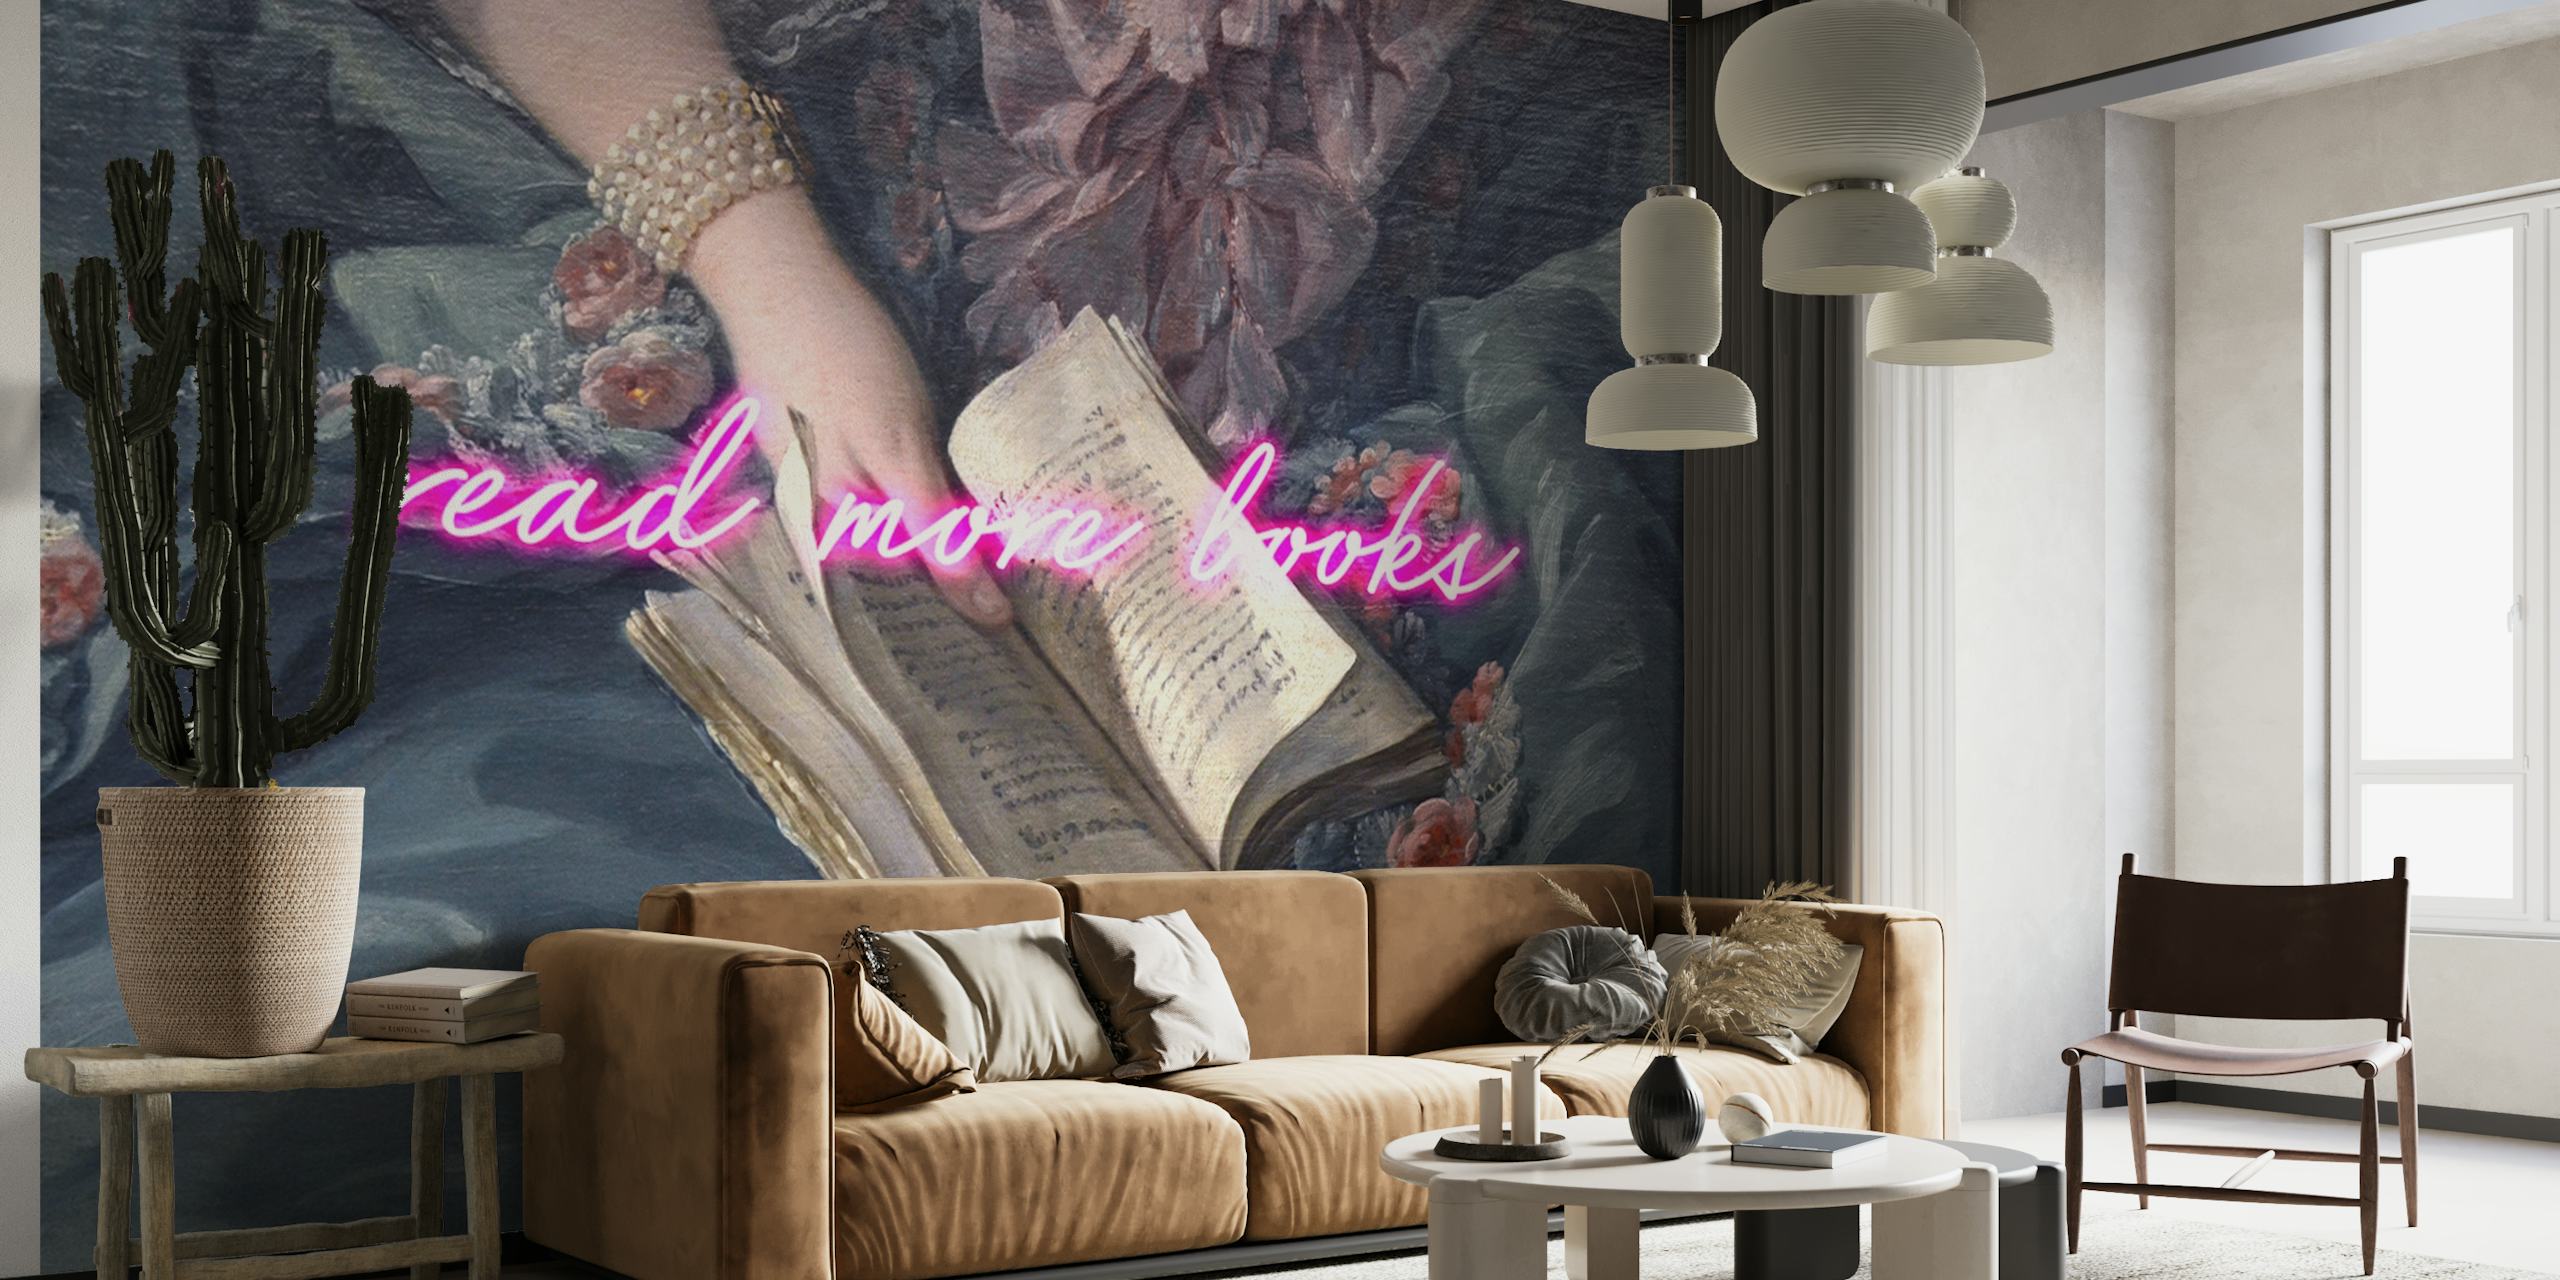 Wall mural with 'read more books' in neon on a vintage reading scene